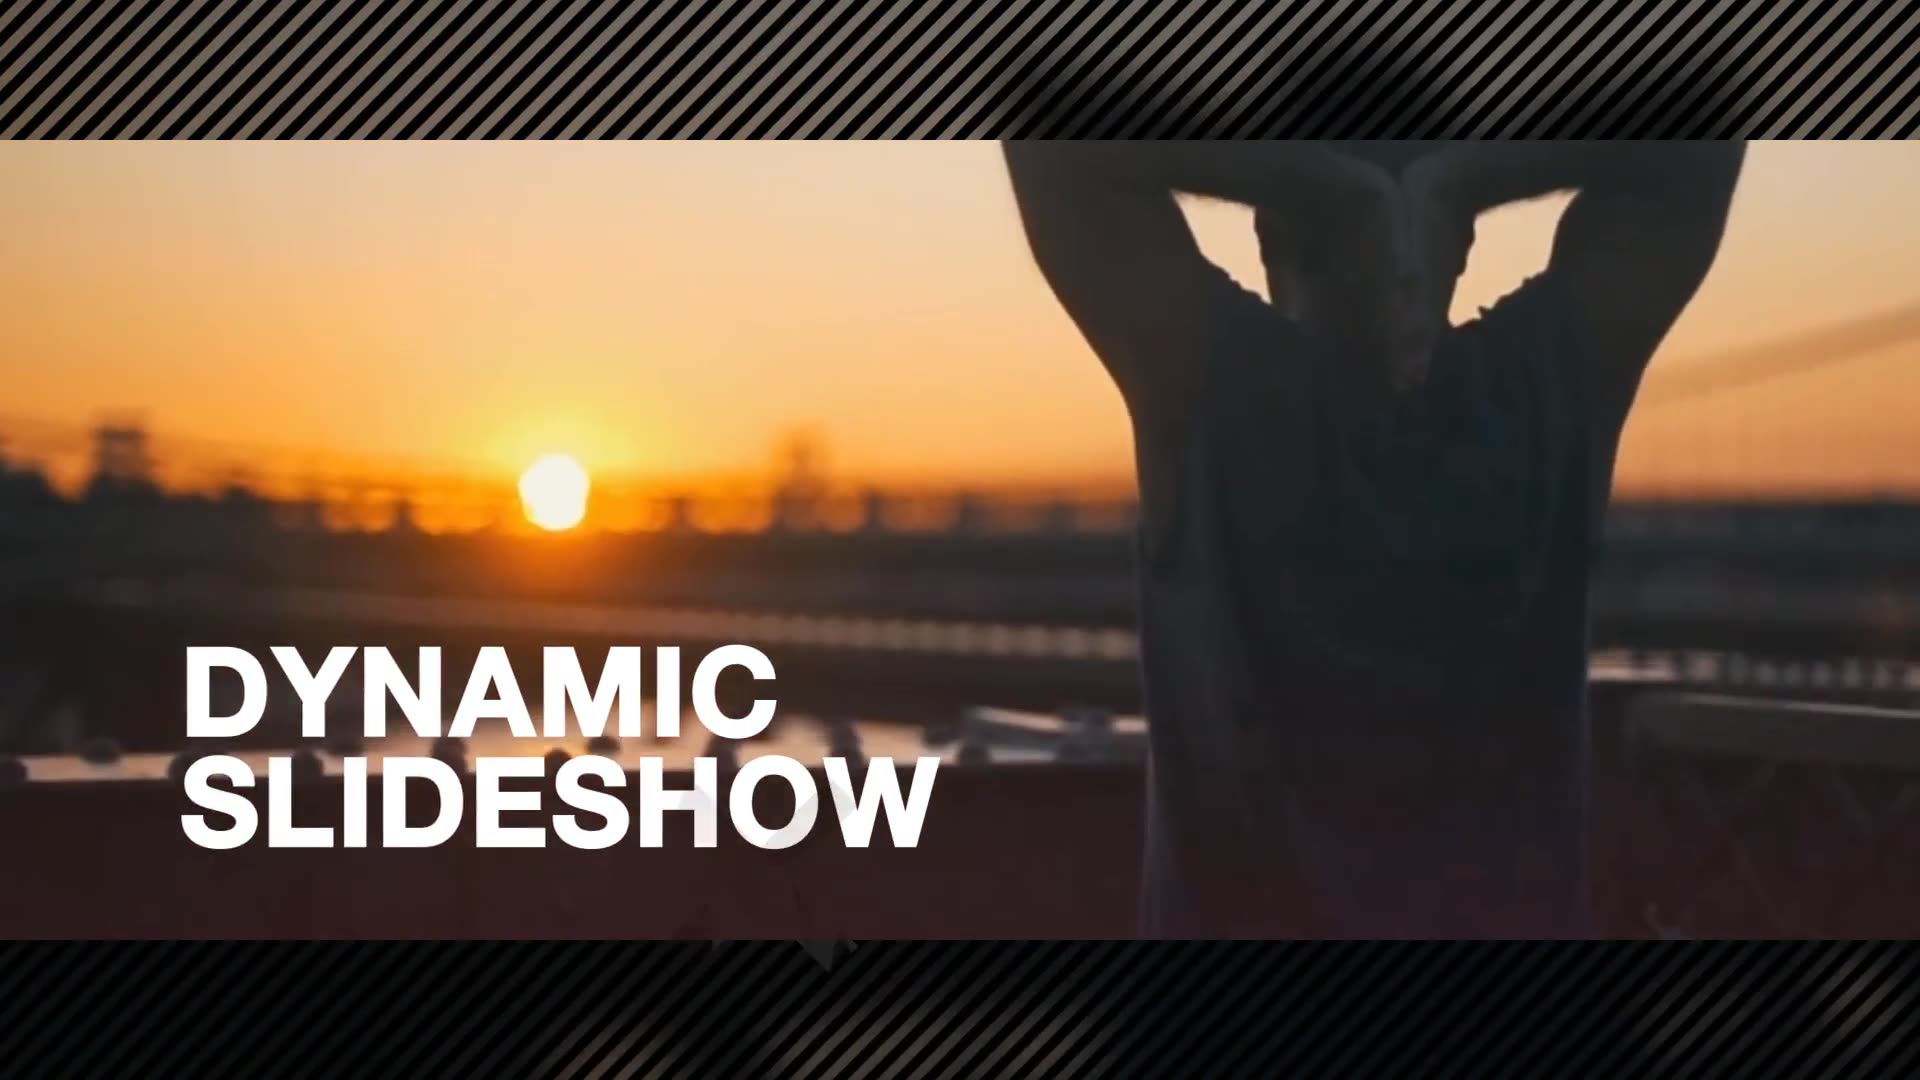 dynamic slideshow free download after effects projects